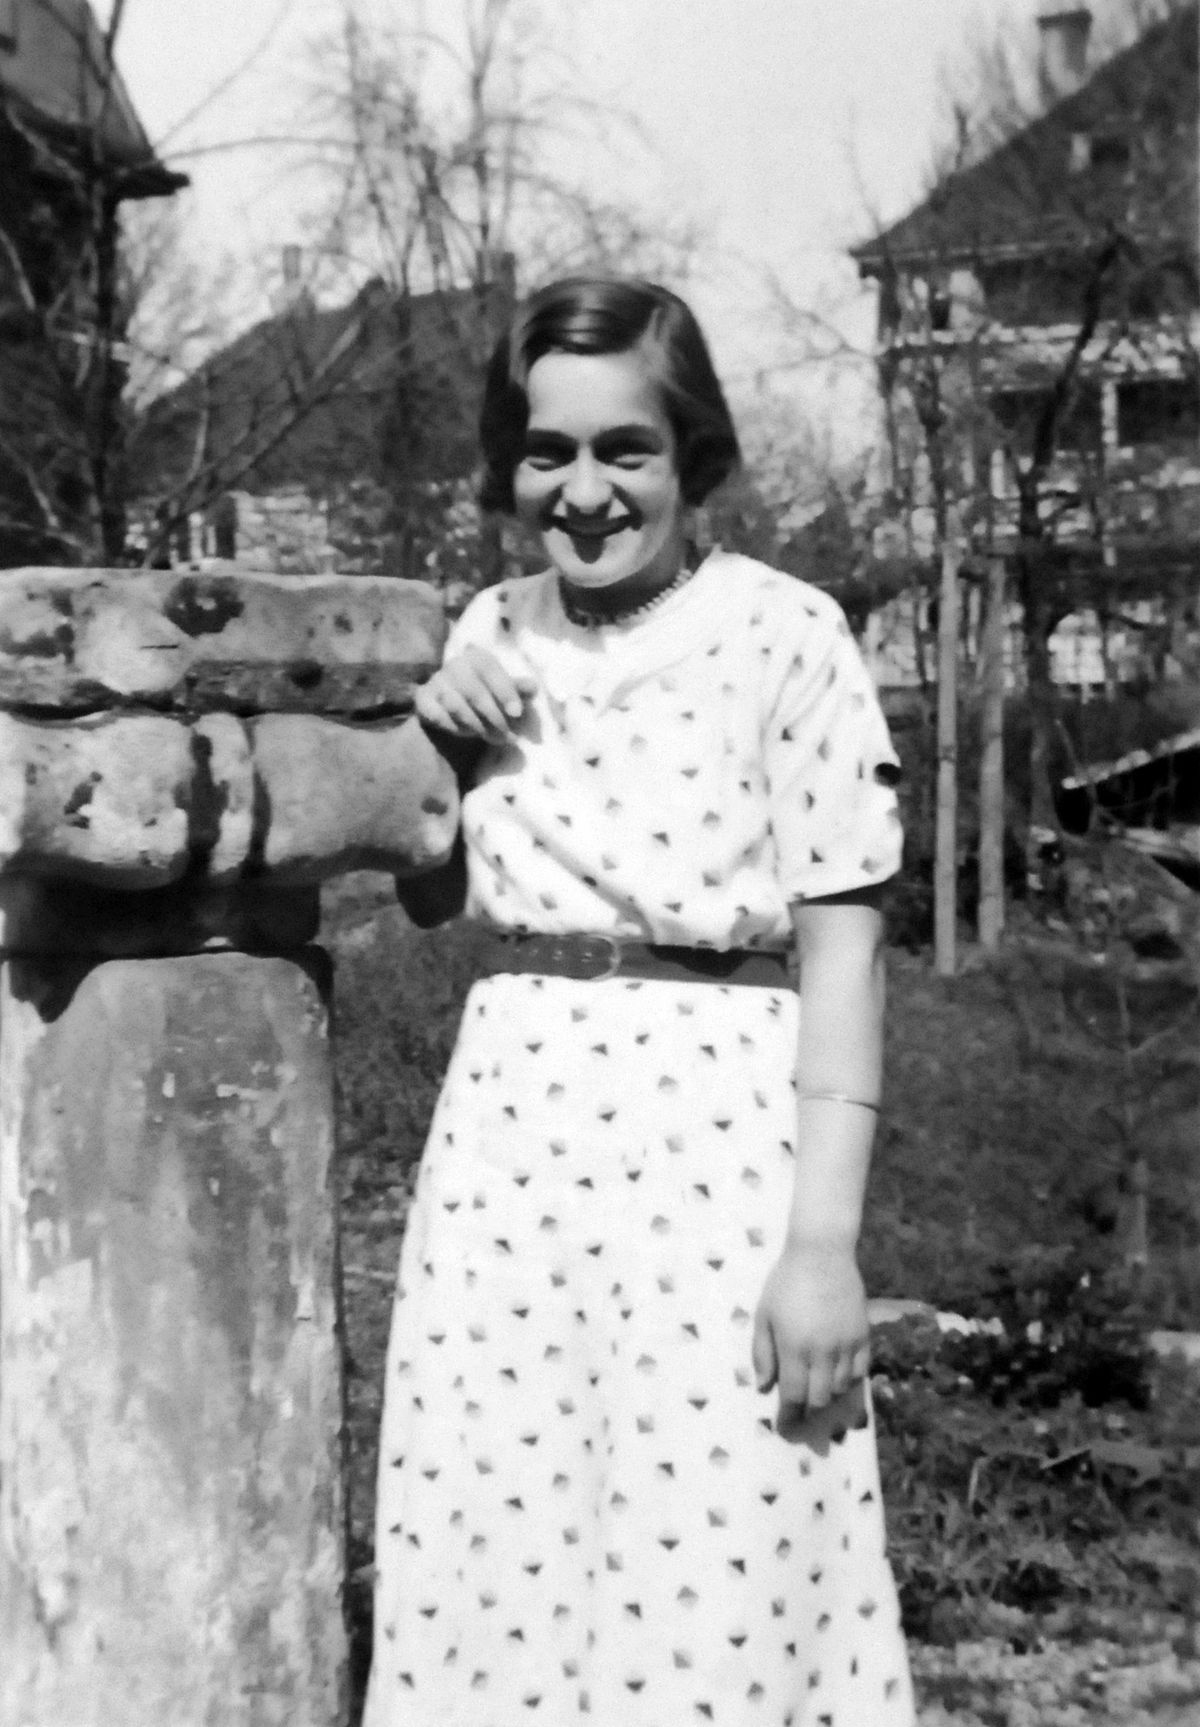 Miriam Abramowitz-Ferszt, shown as a young teen in this family snapshot, was from a rural area near Munich. Her family, of Jewish descent, was hidden by friends and associates during the Nazi era. (Jesse Tinsley / The Spokesman-Review)